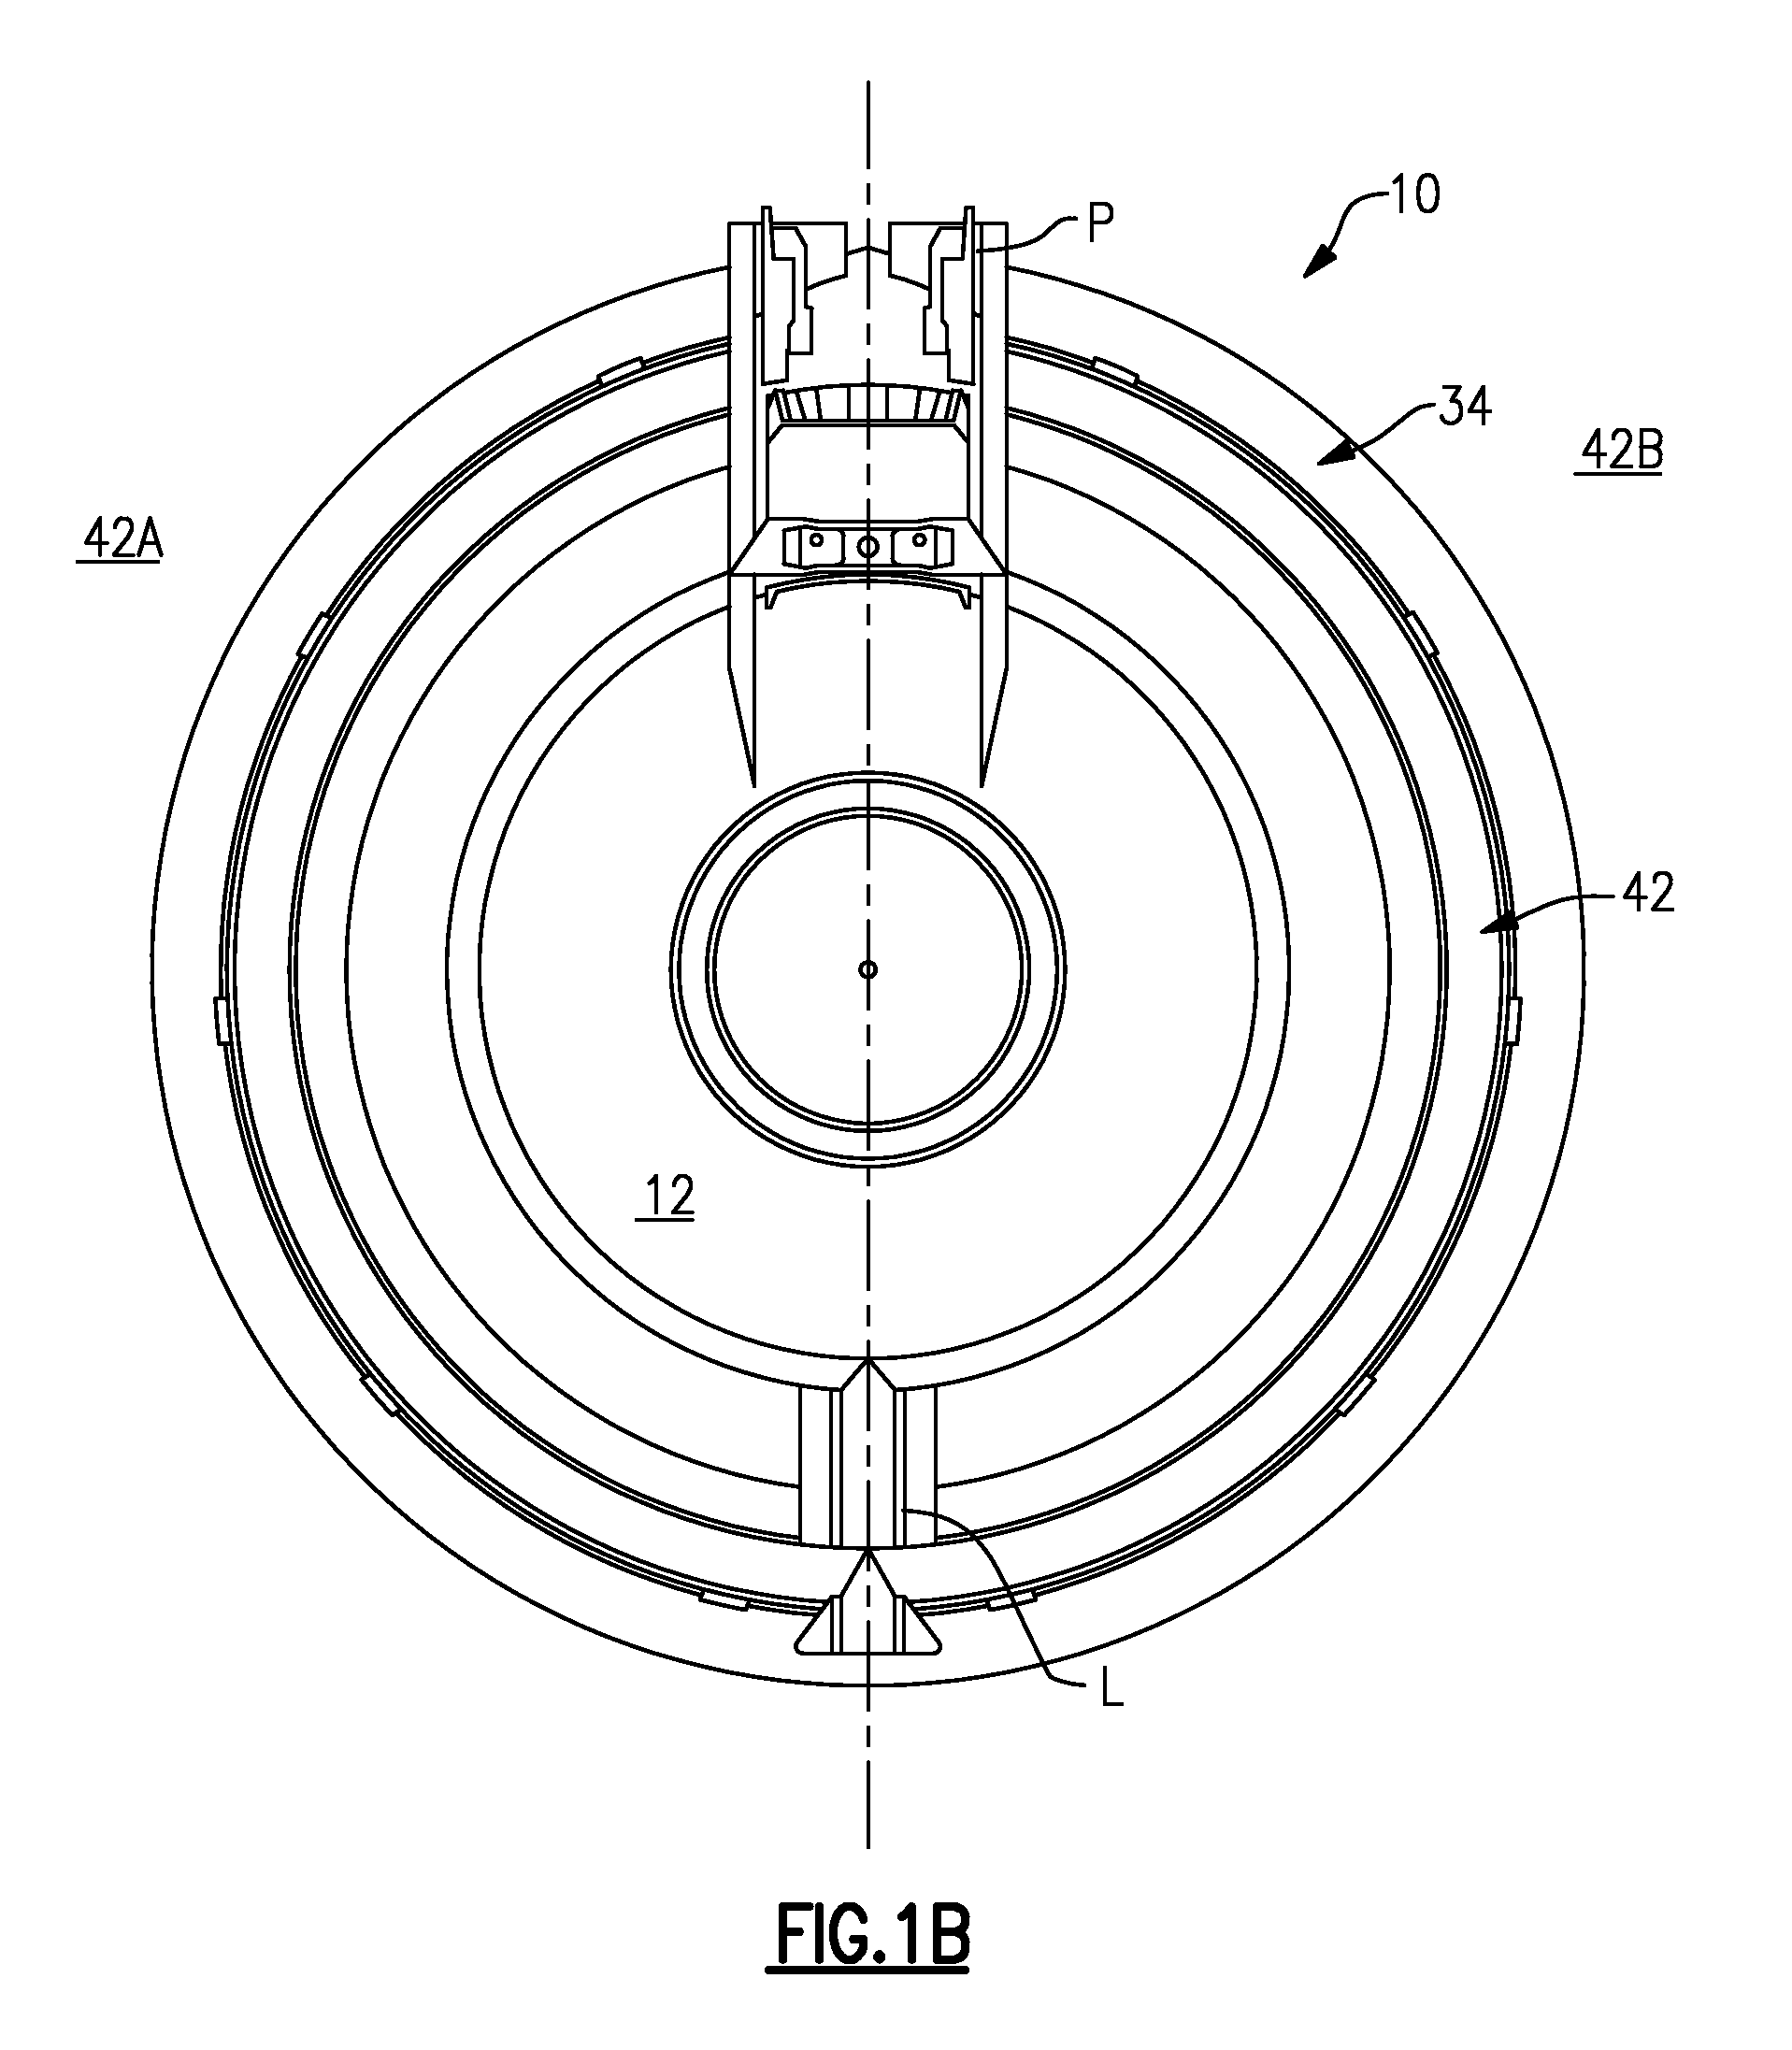 Gas turbine engine with noise attenuating variable area fan nozzle